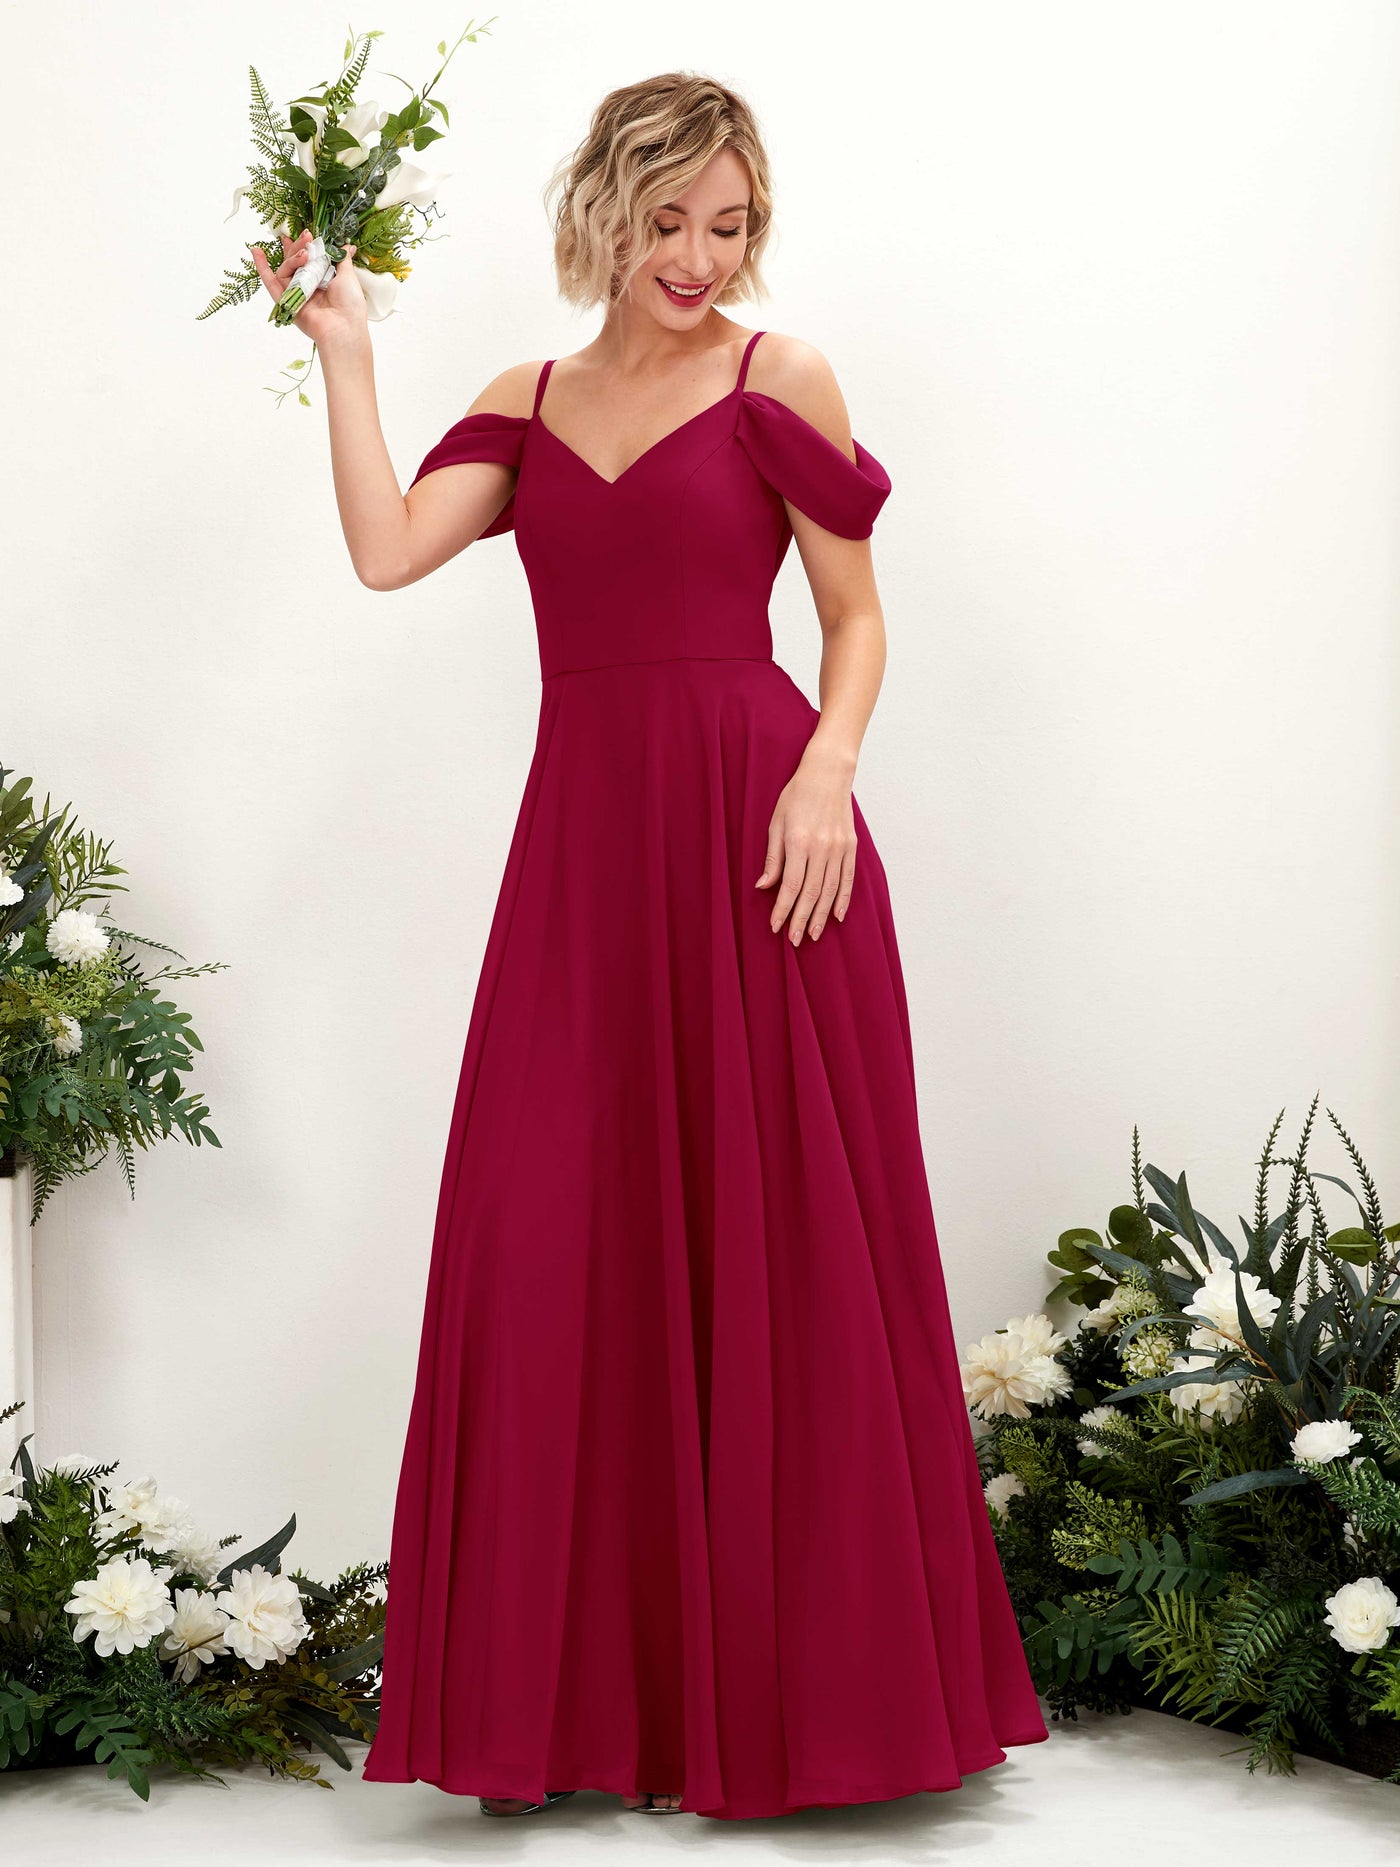 Jester Red Bridesmaid Dresses Bridesmaid Dress A-line Chiffon Off Shoulder Full Length Sleeveless Wedding Party Dress (81224941)#color_jester-red